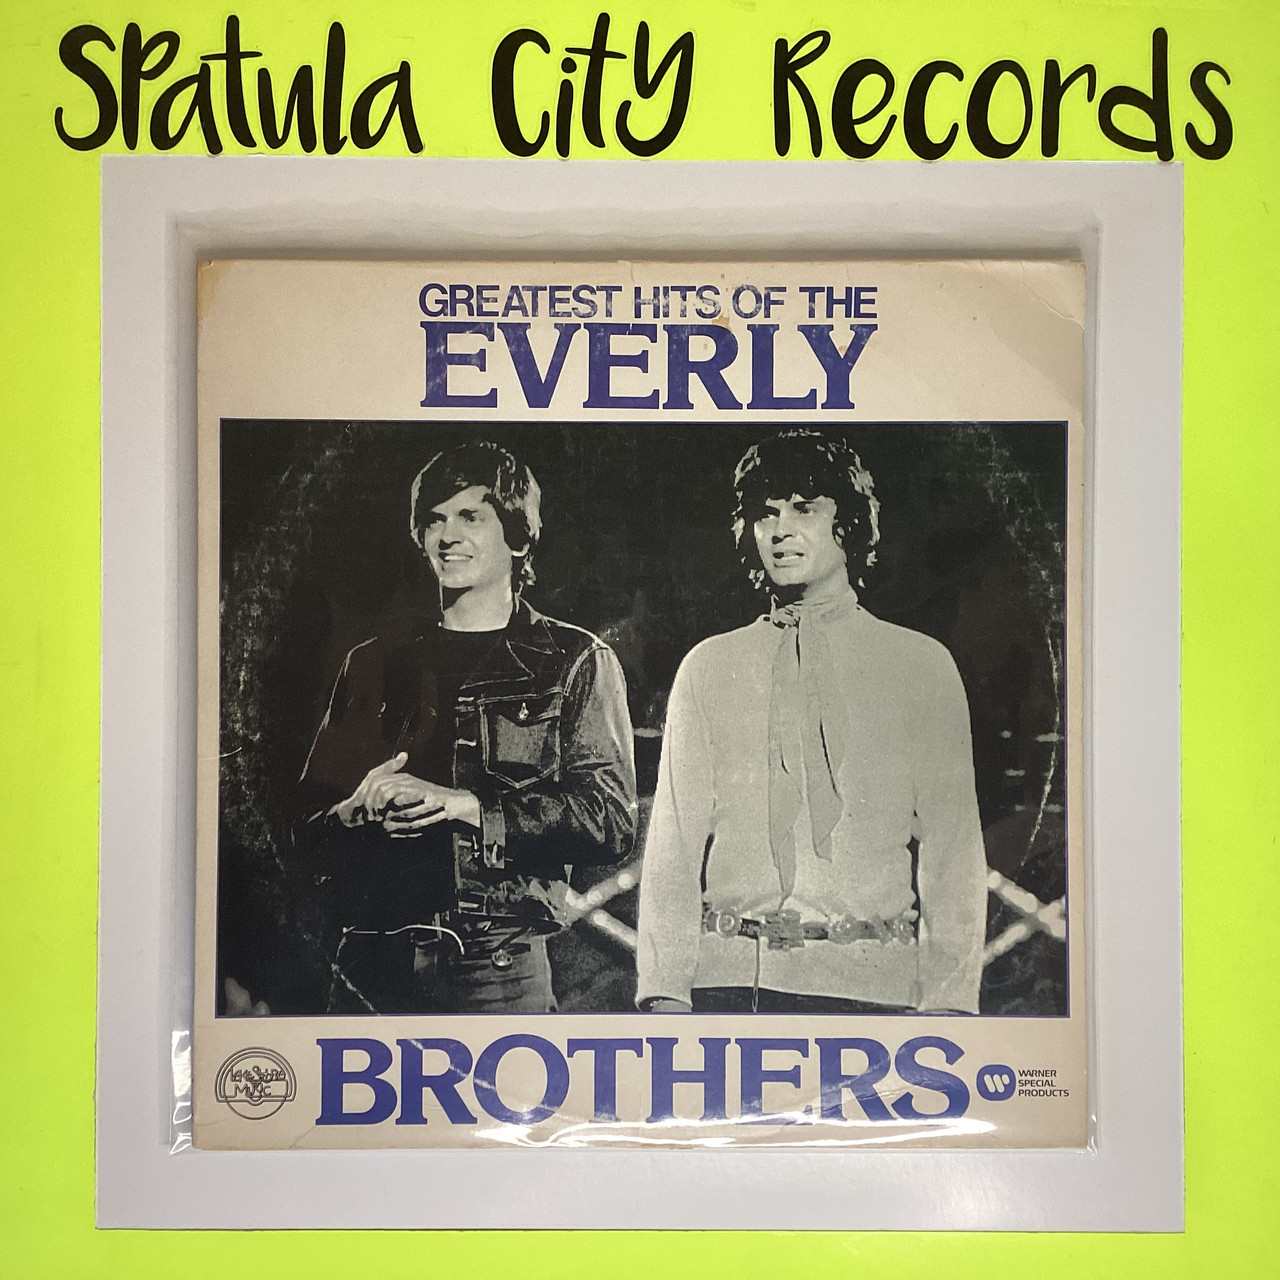 The Everly Brothers - Greatest Hits of The Everly Brothers - double vinyl record album LP